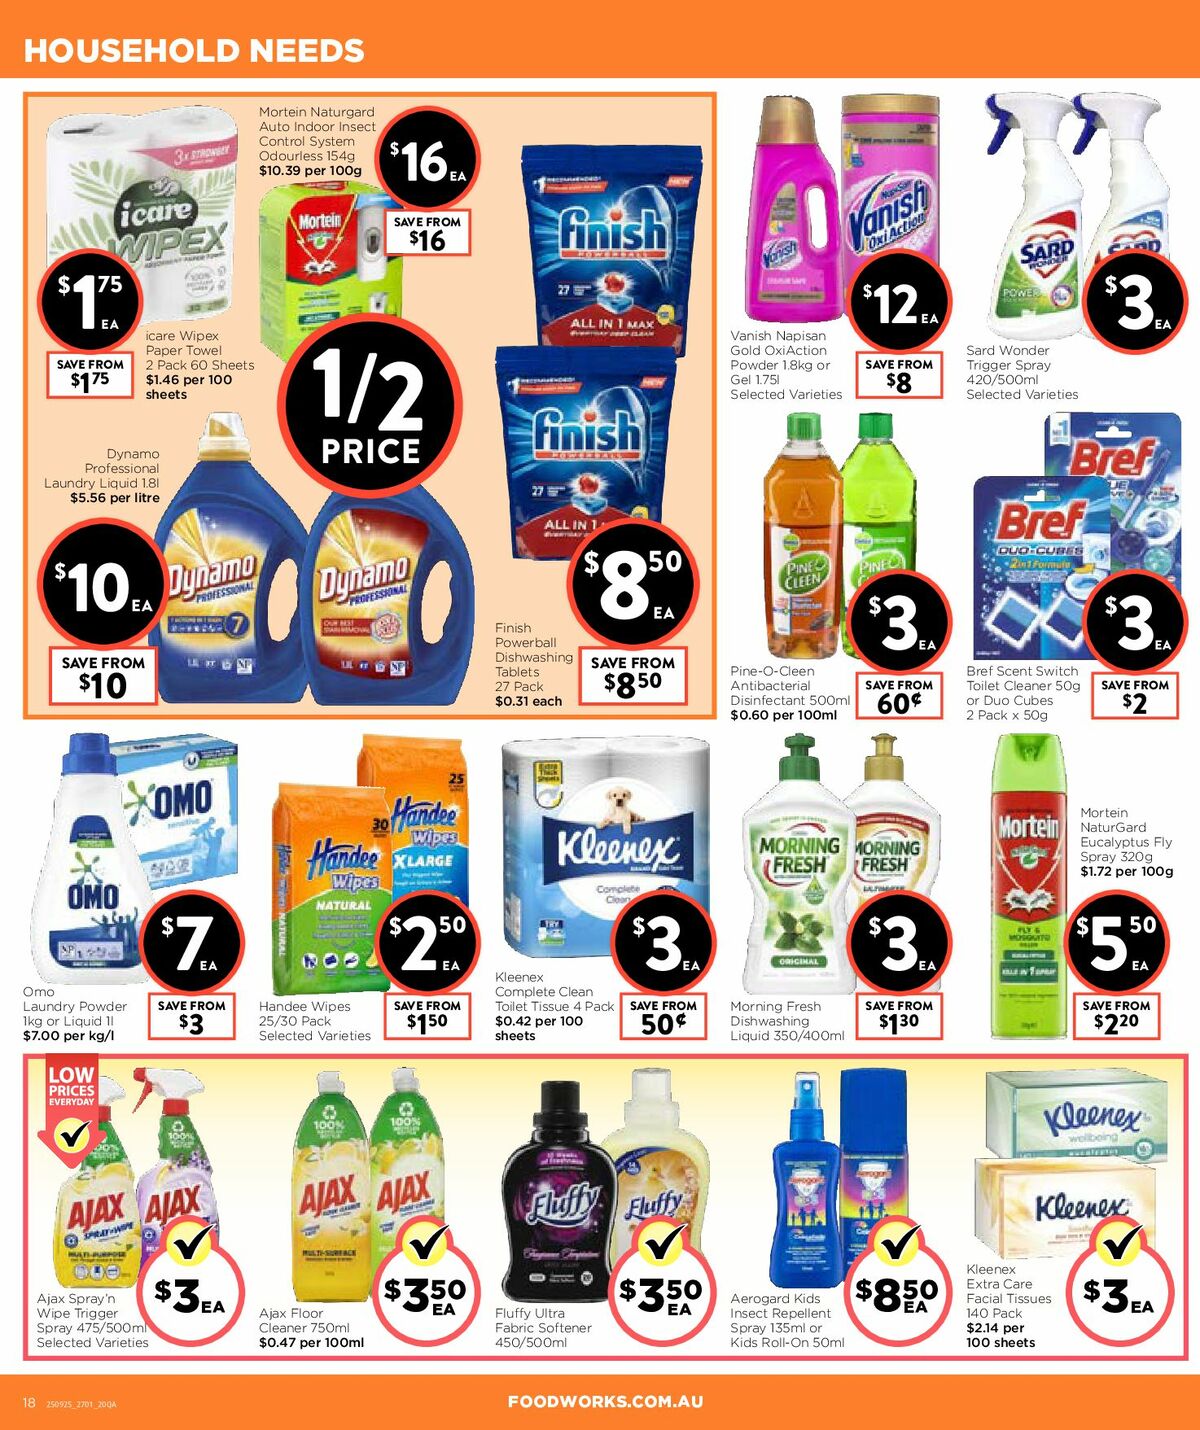 FoodWorks Supermarket Catalogues from 27 January